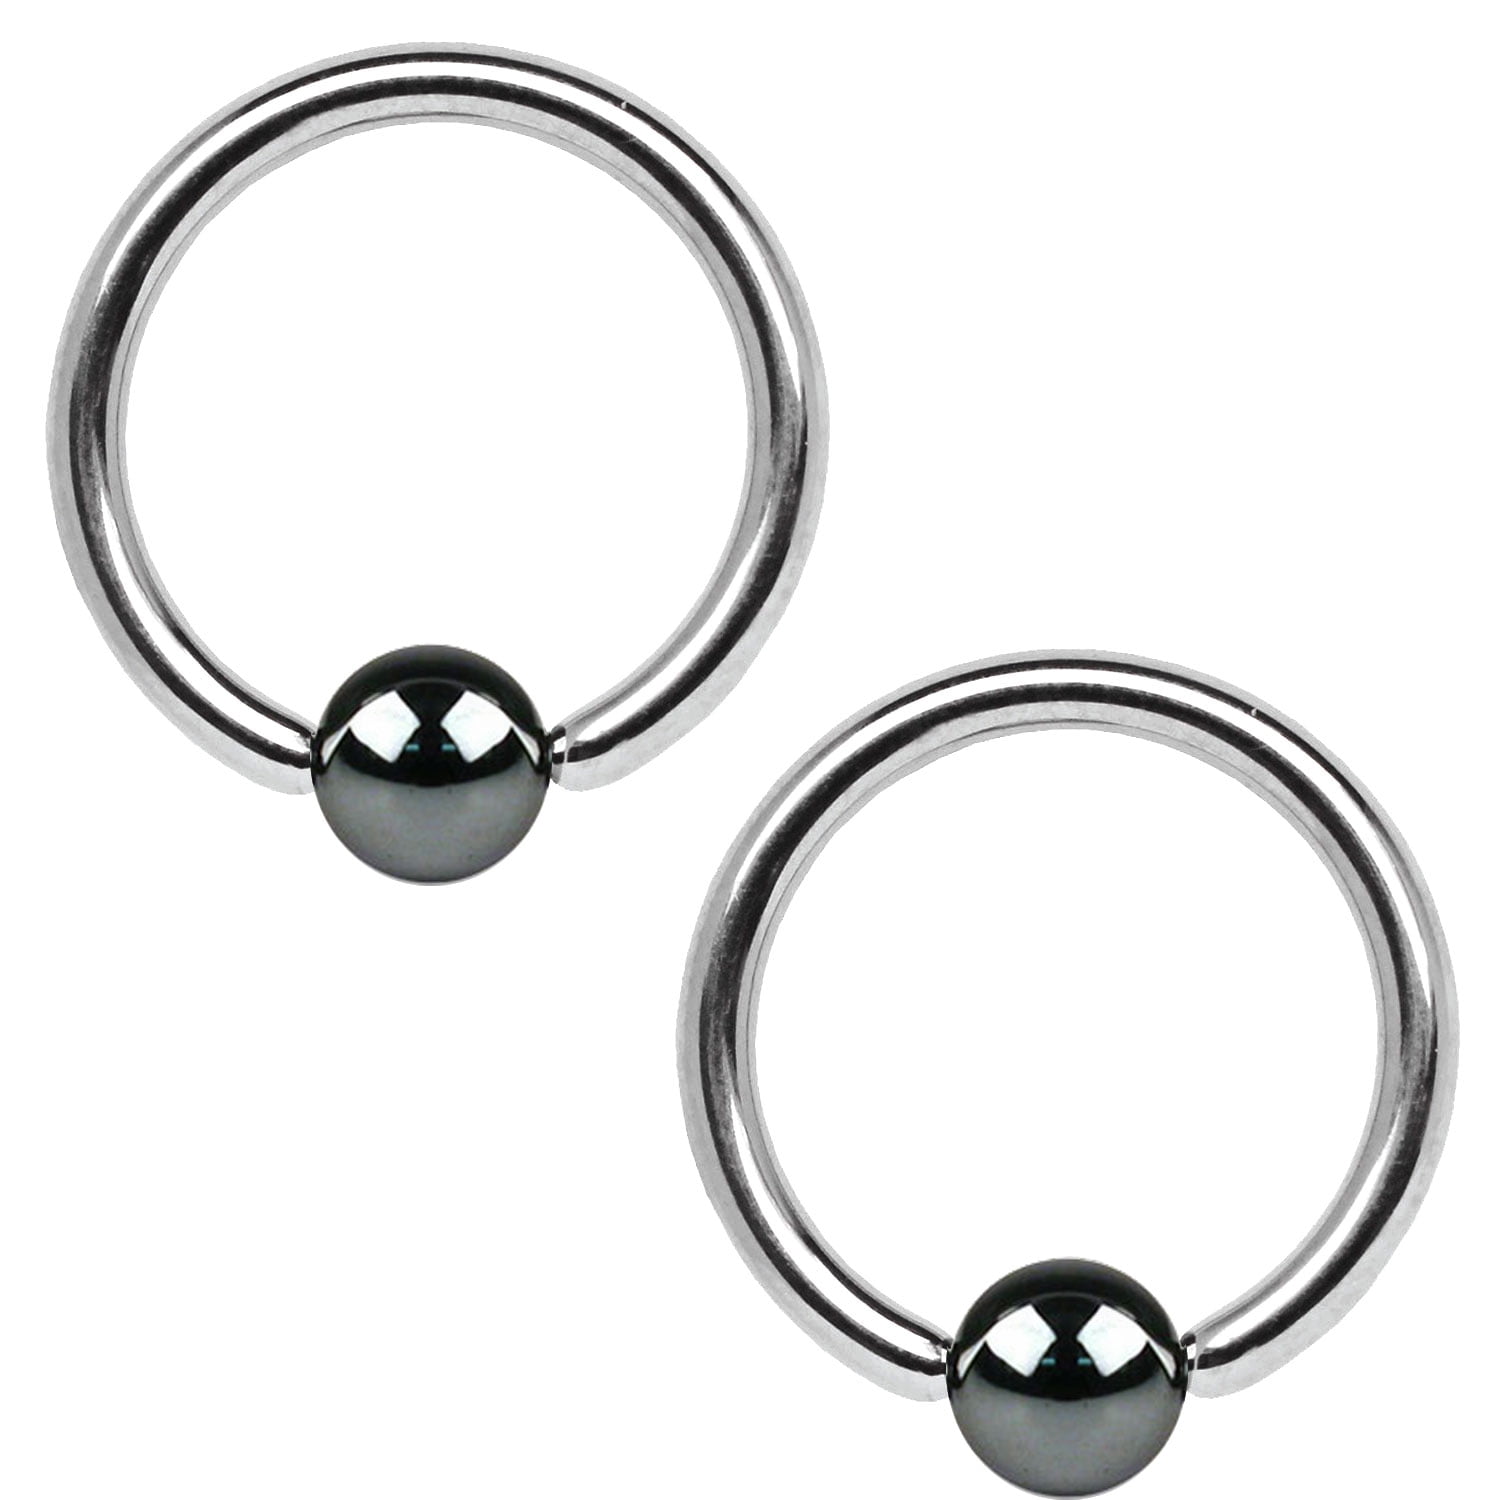 20G-12G BCR PIERCING STAINLESS STEEL CAPTIVE RING TRAGUS NOSE NIPPLE EAR HELIX 